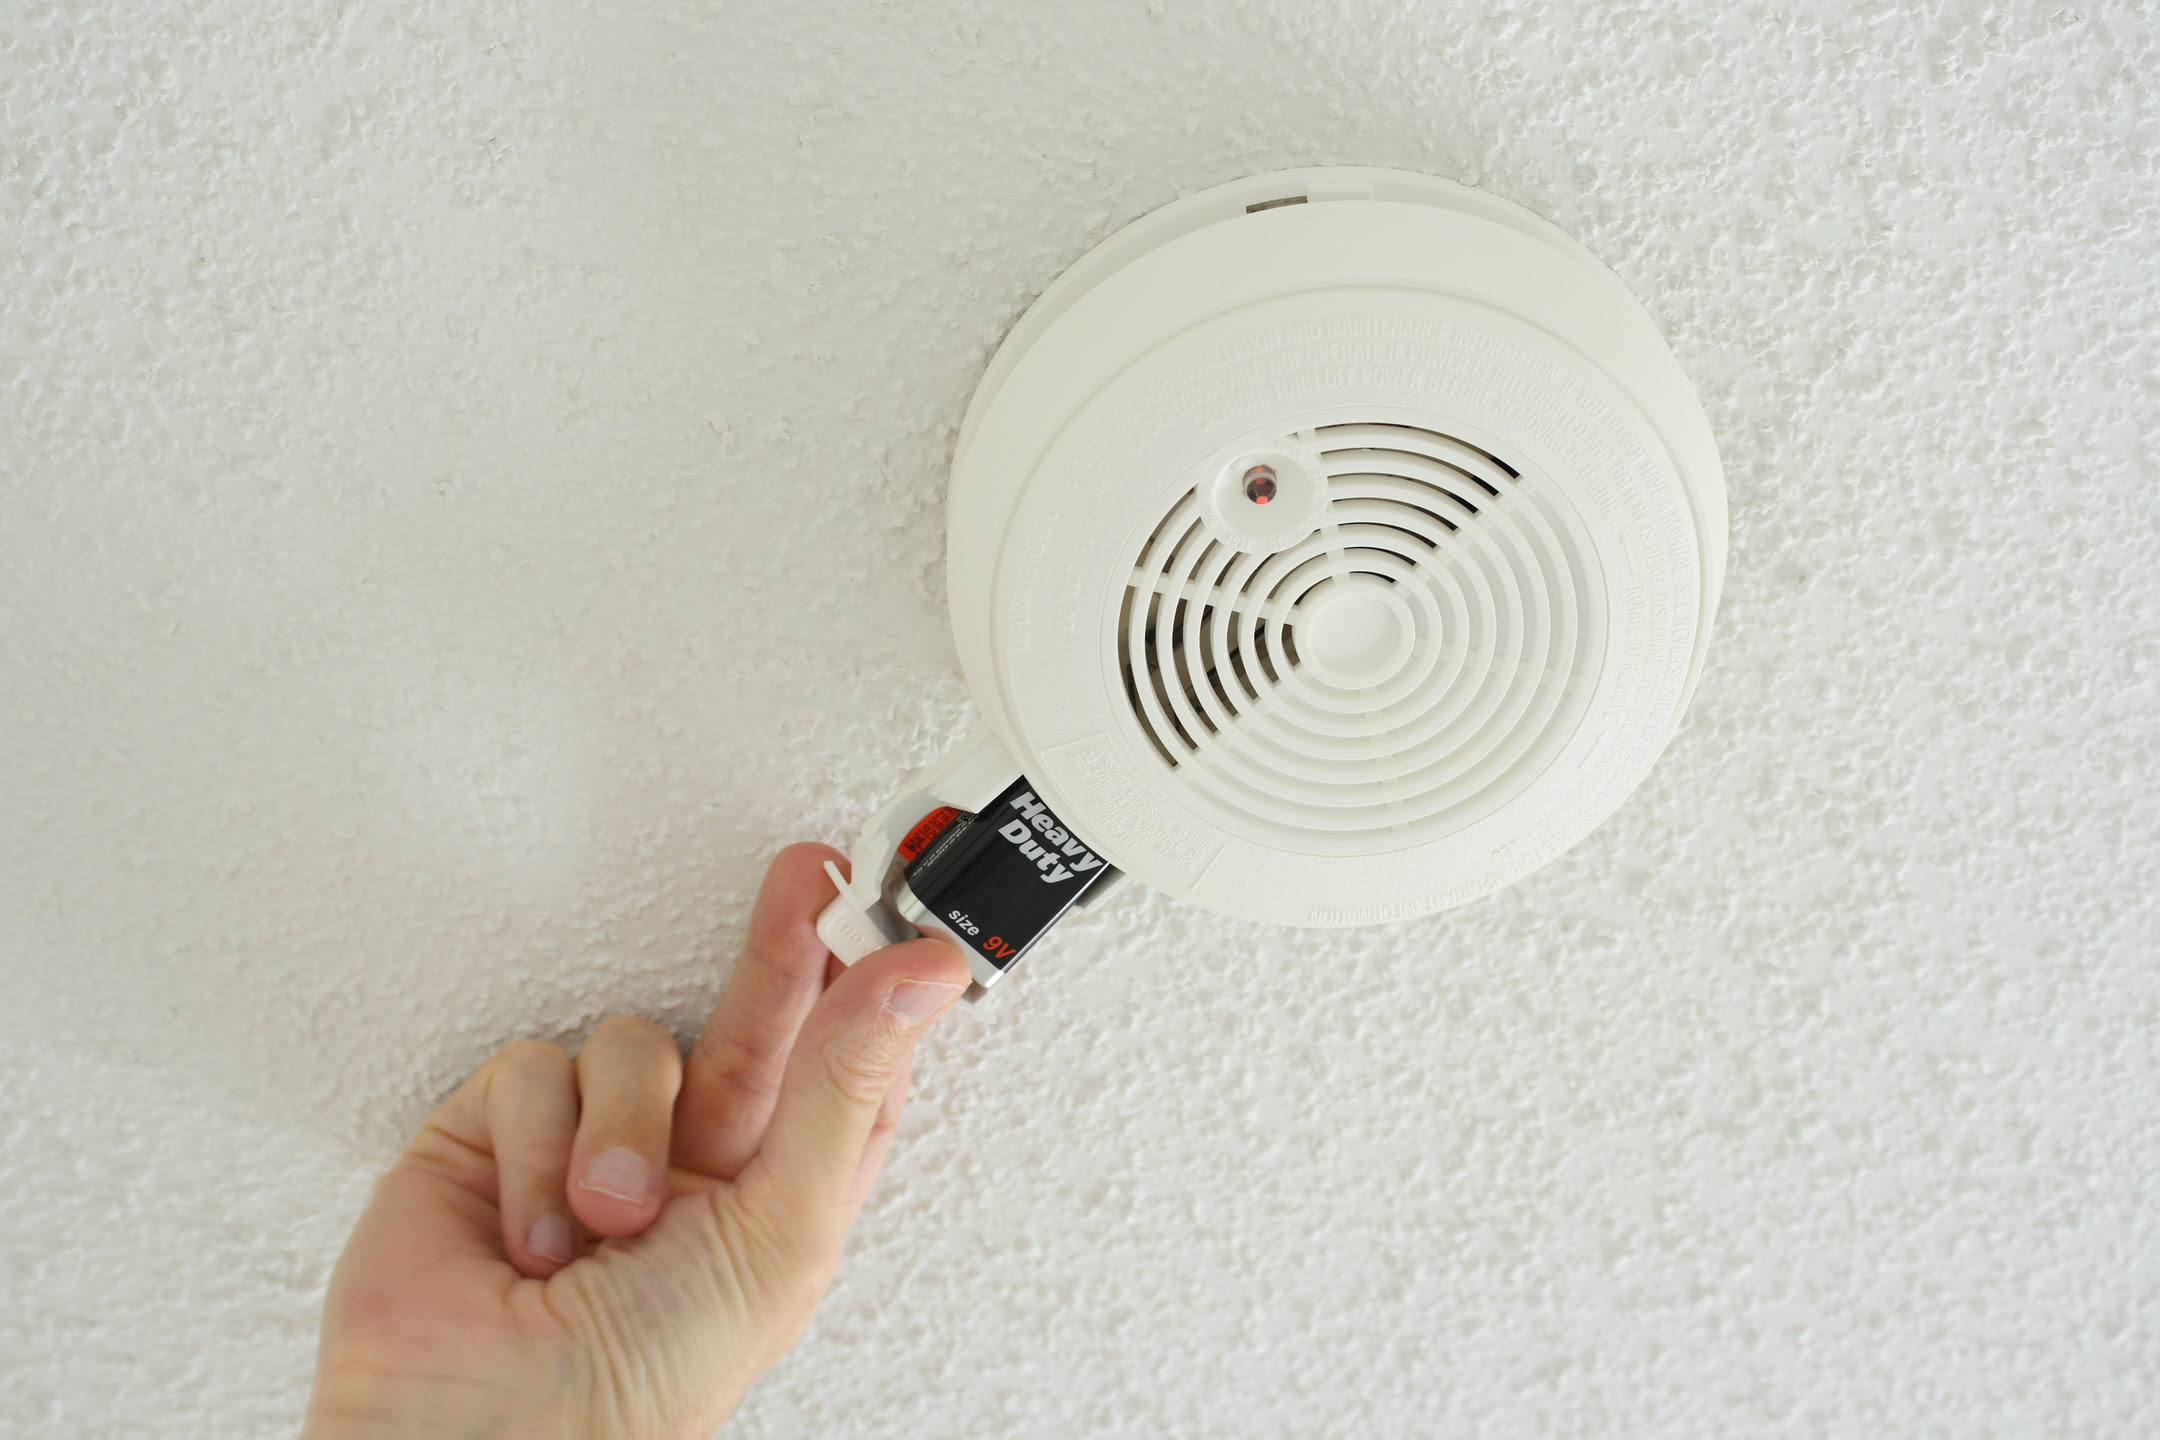 Why Is My Carbon Monoxide Detector Chirping After I Changed The Battery?